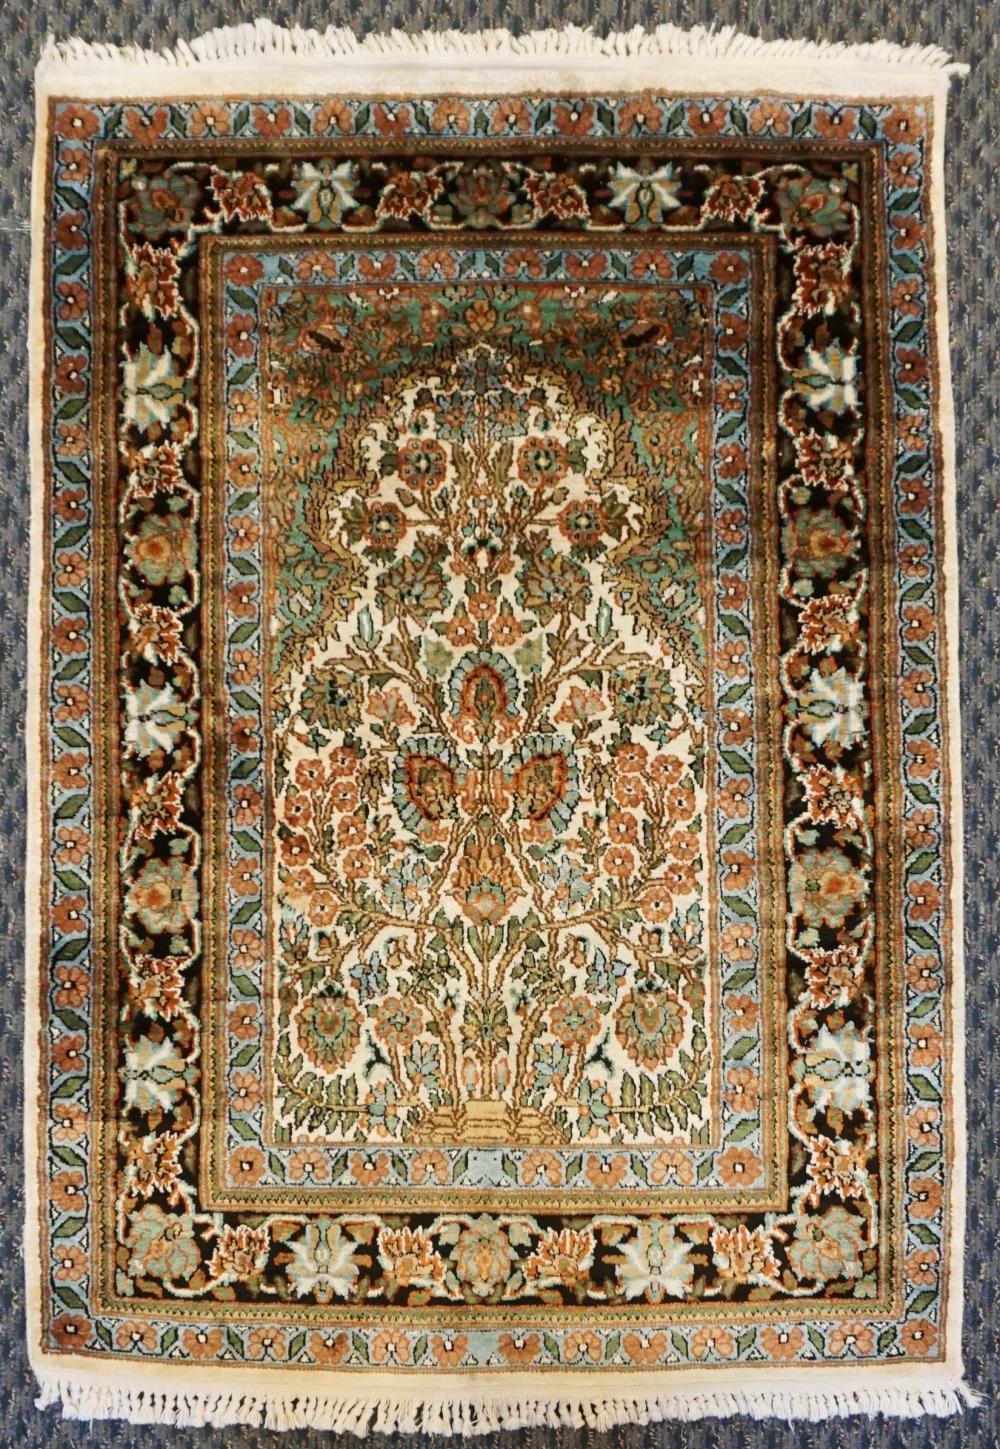 ISFAHAN RUG 3 FT 10 IN X 2 FT 32cb4e